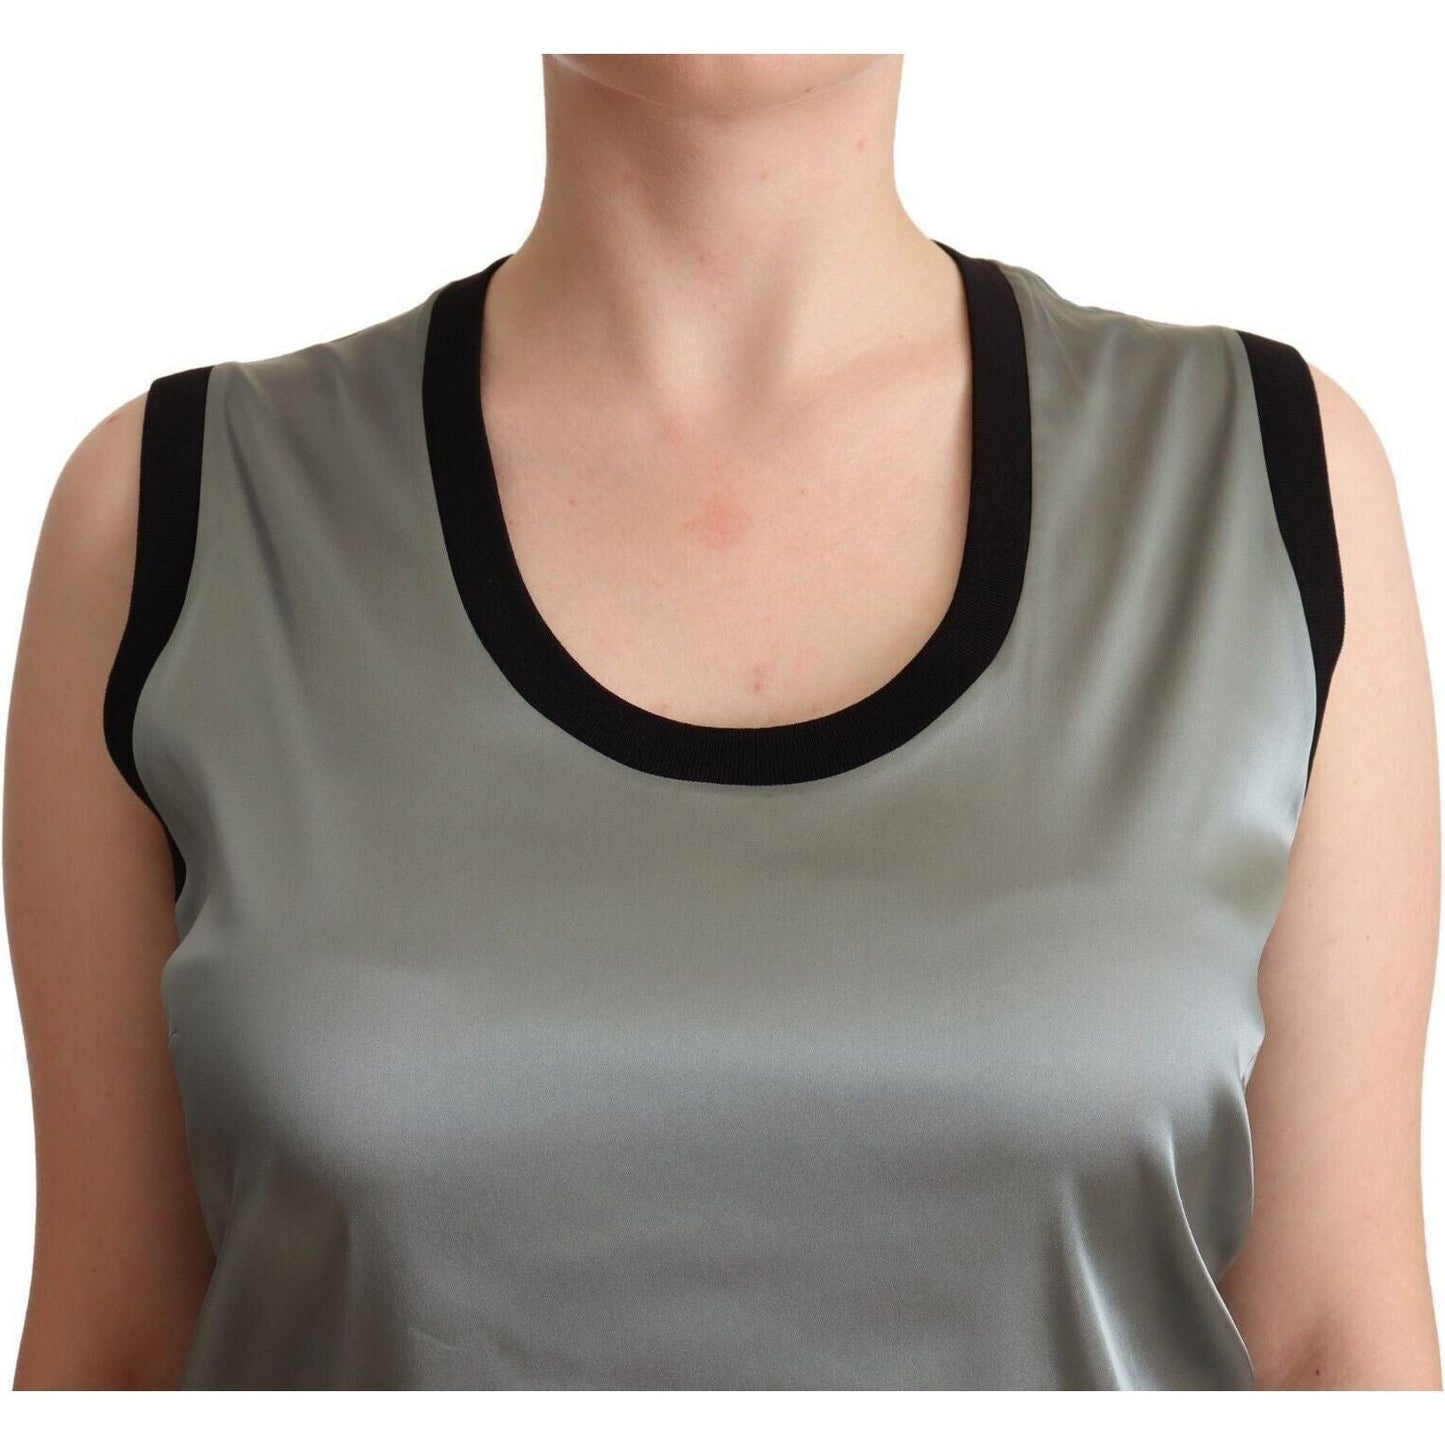 Dolce & Gabbana Elegant Silver Sleeveless Blouse WOMAN TOPS AND SHIRTS silver-round-neck-sleeveless-casual-tank-top s-l1600-2-101-e62a6bc7-91d.jpg